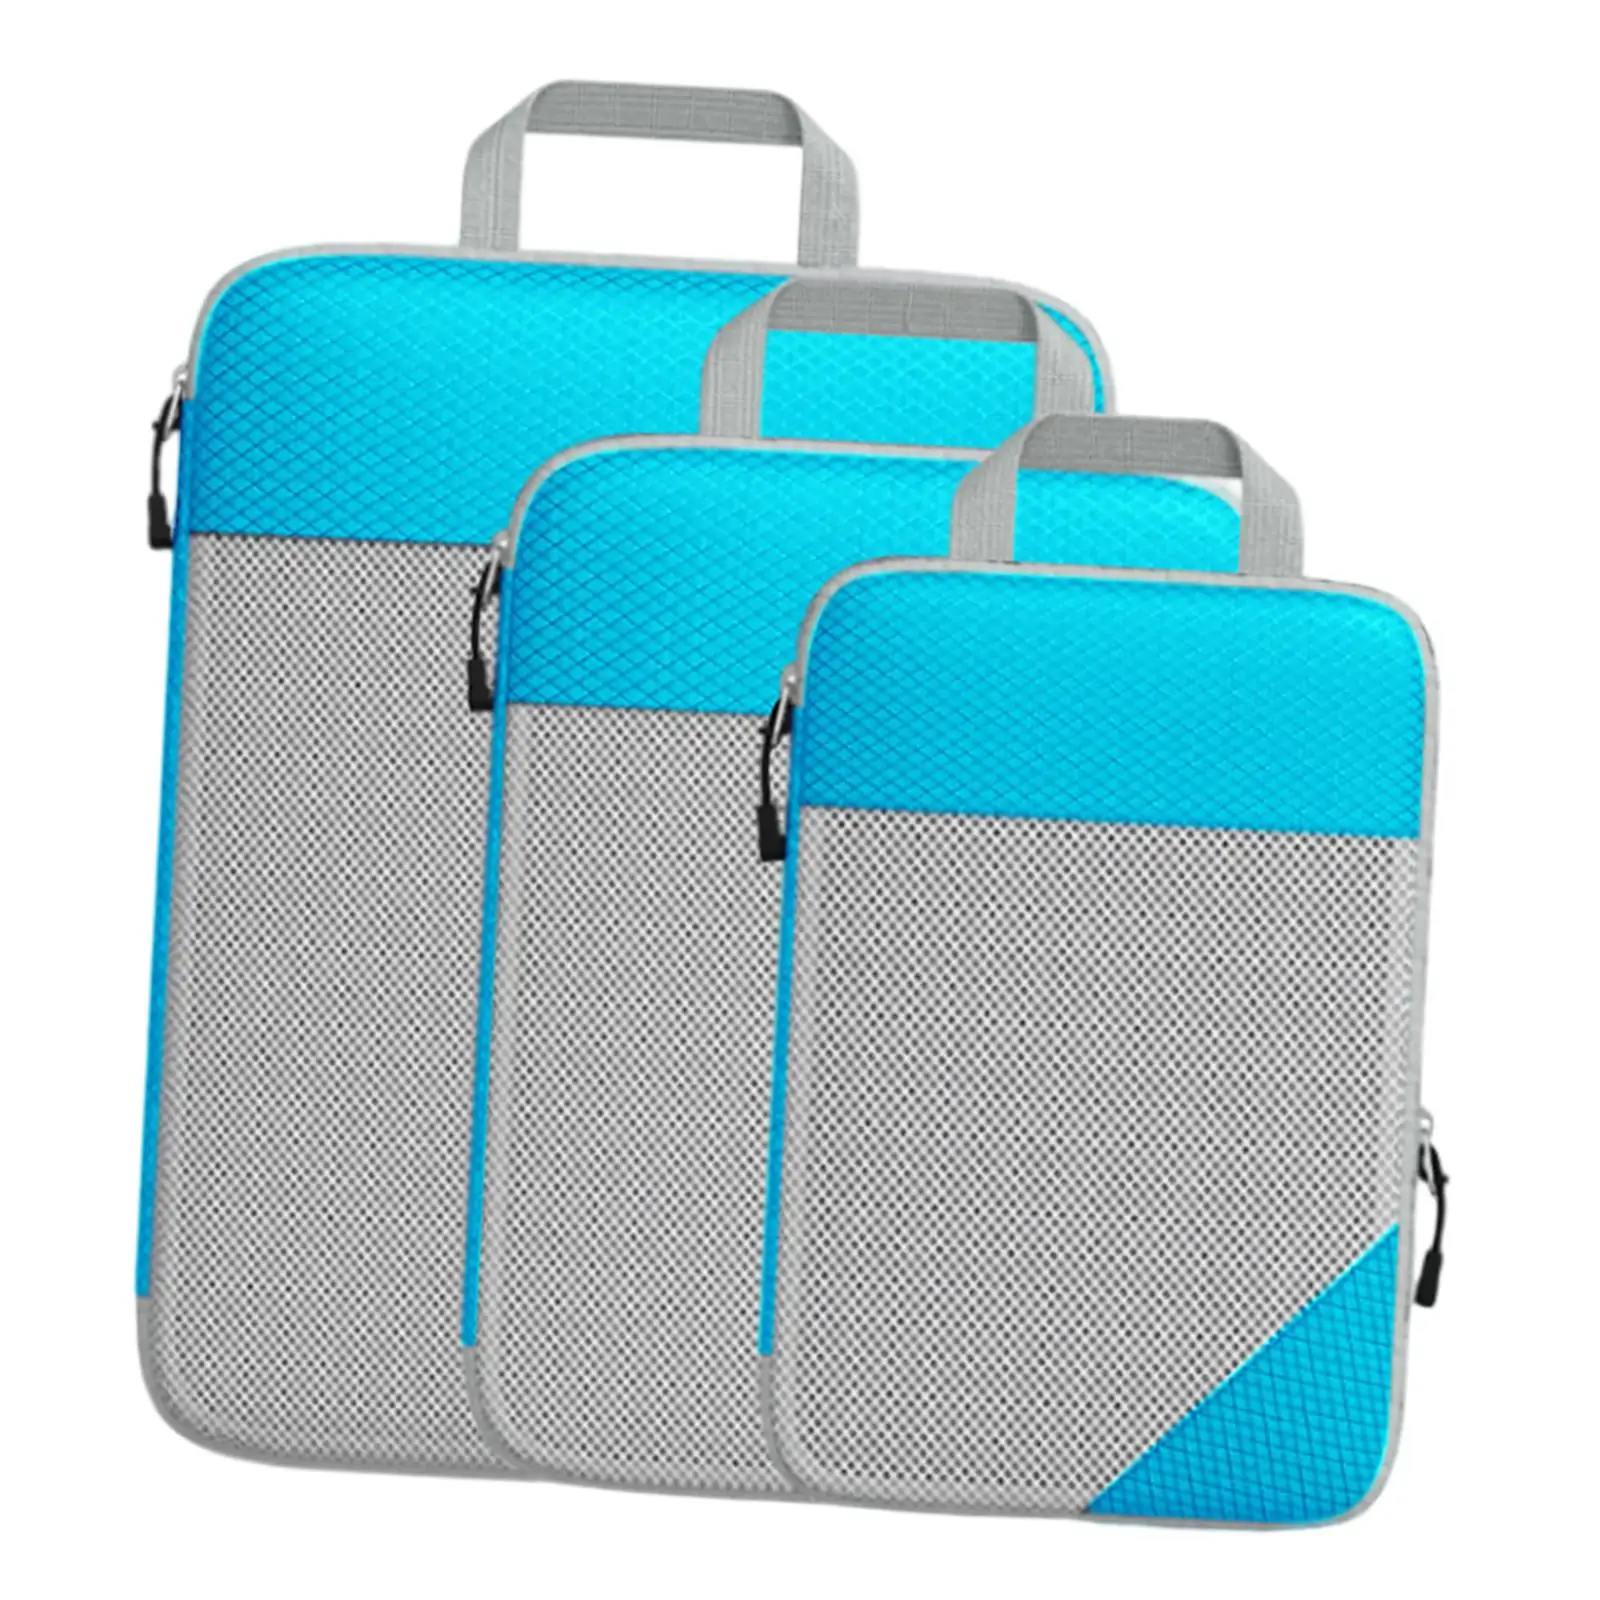 Travel Packing Cubes Set 3Pcs Suitcase Organizer Bags for Travel, Trip, or